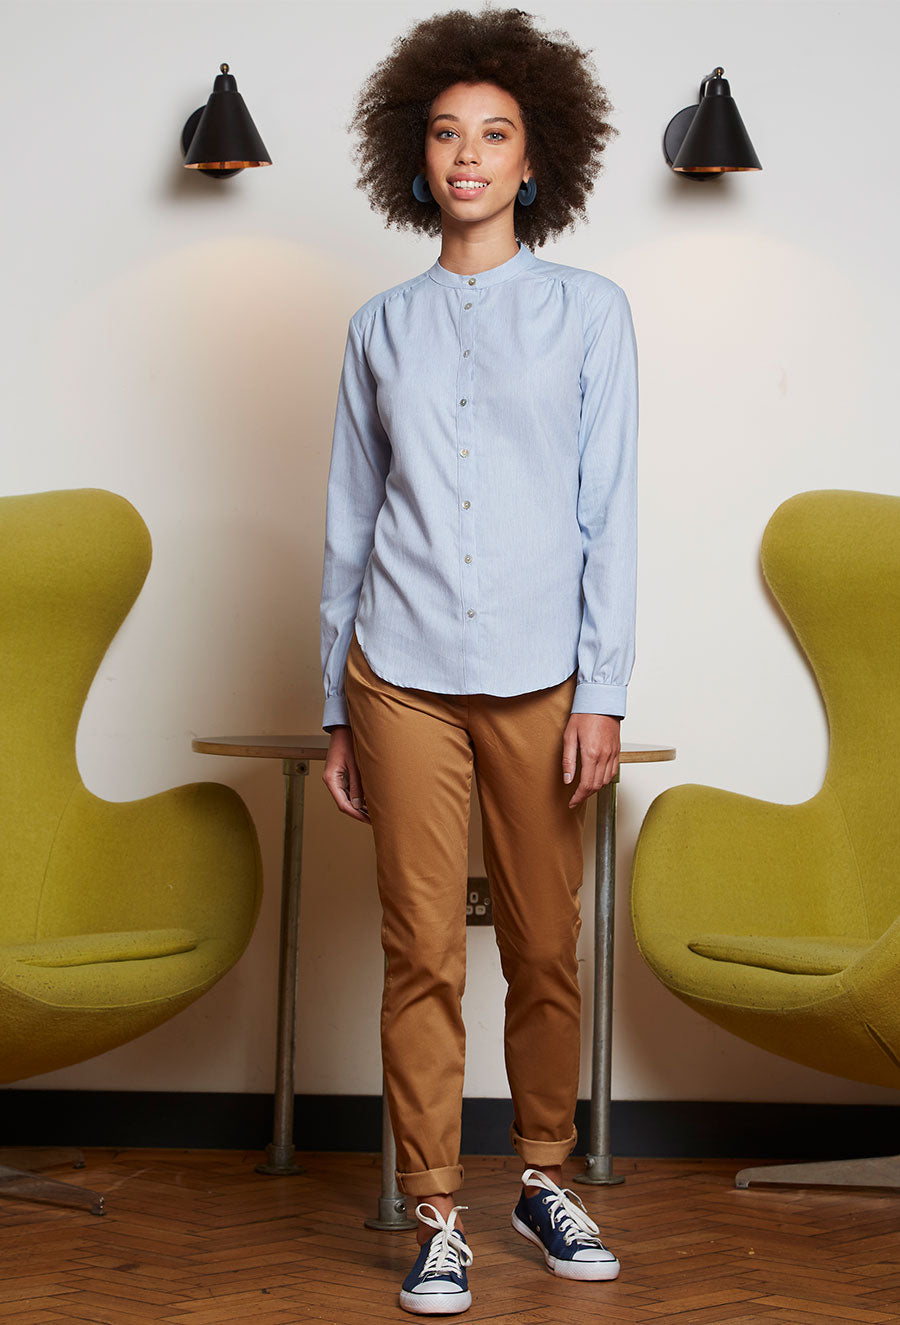 Female Grandad Collared Shirt (With Pockets)